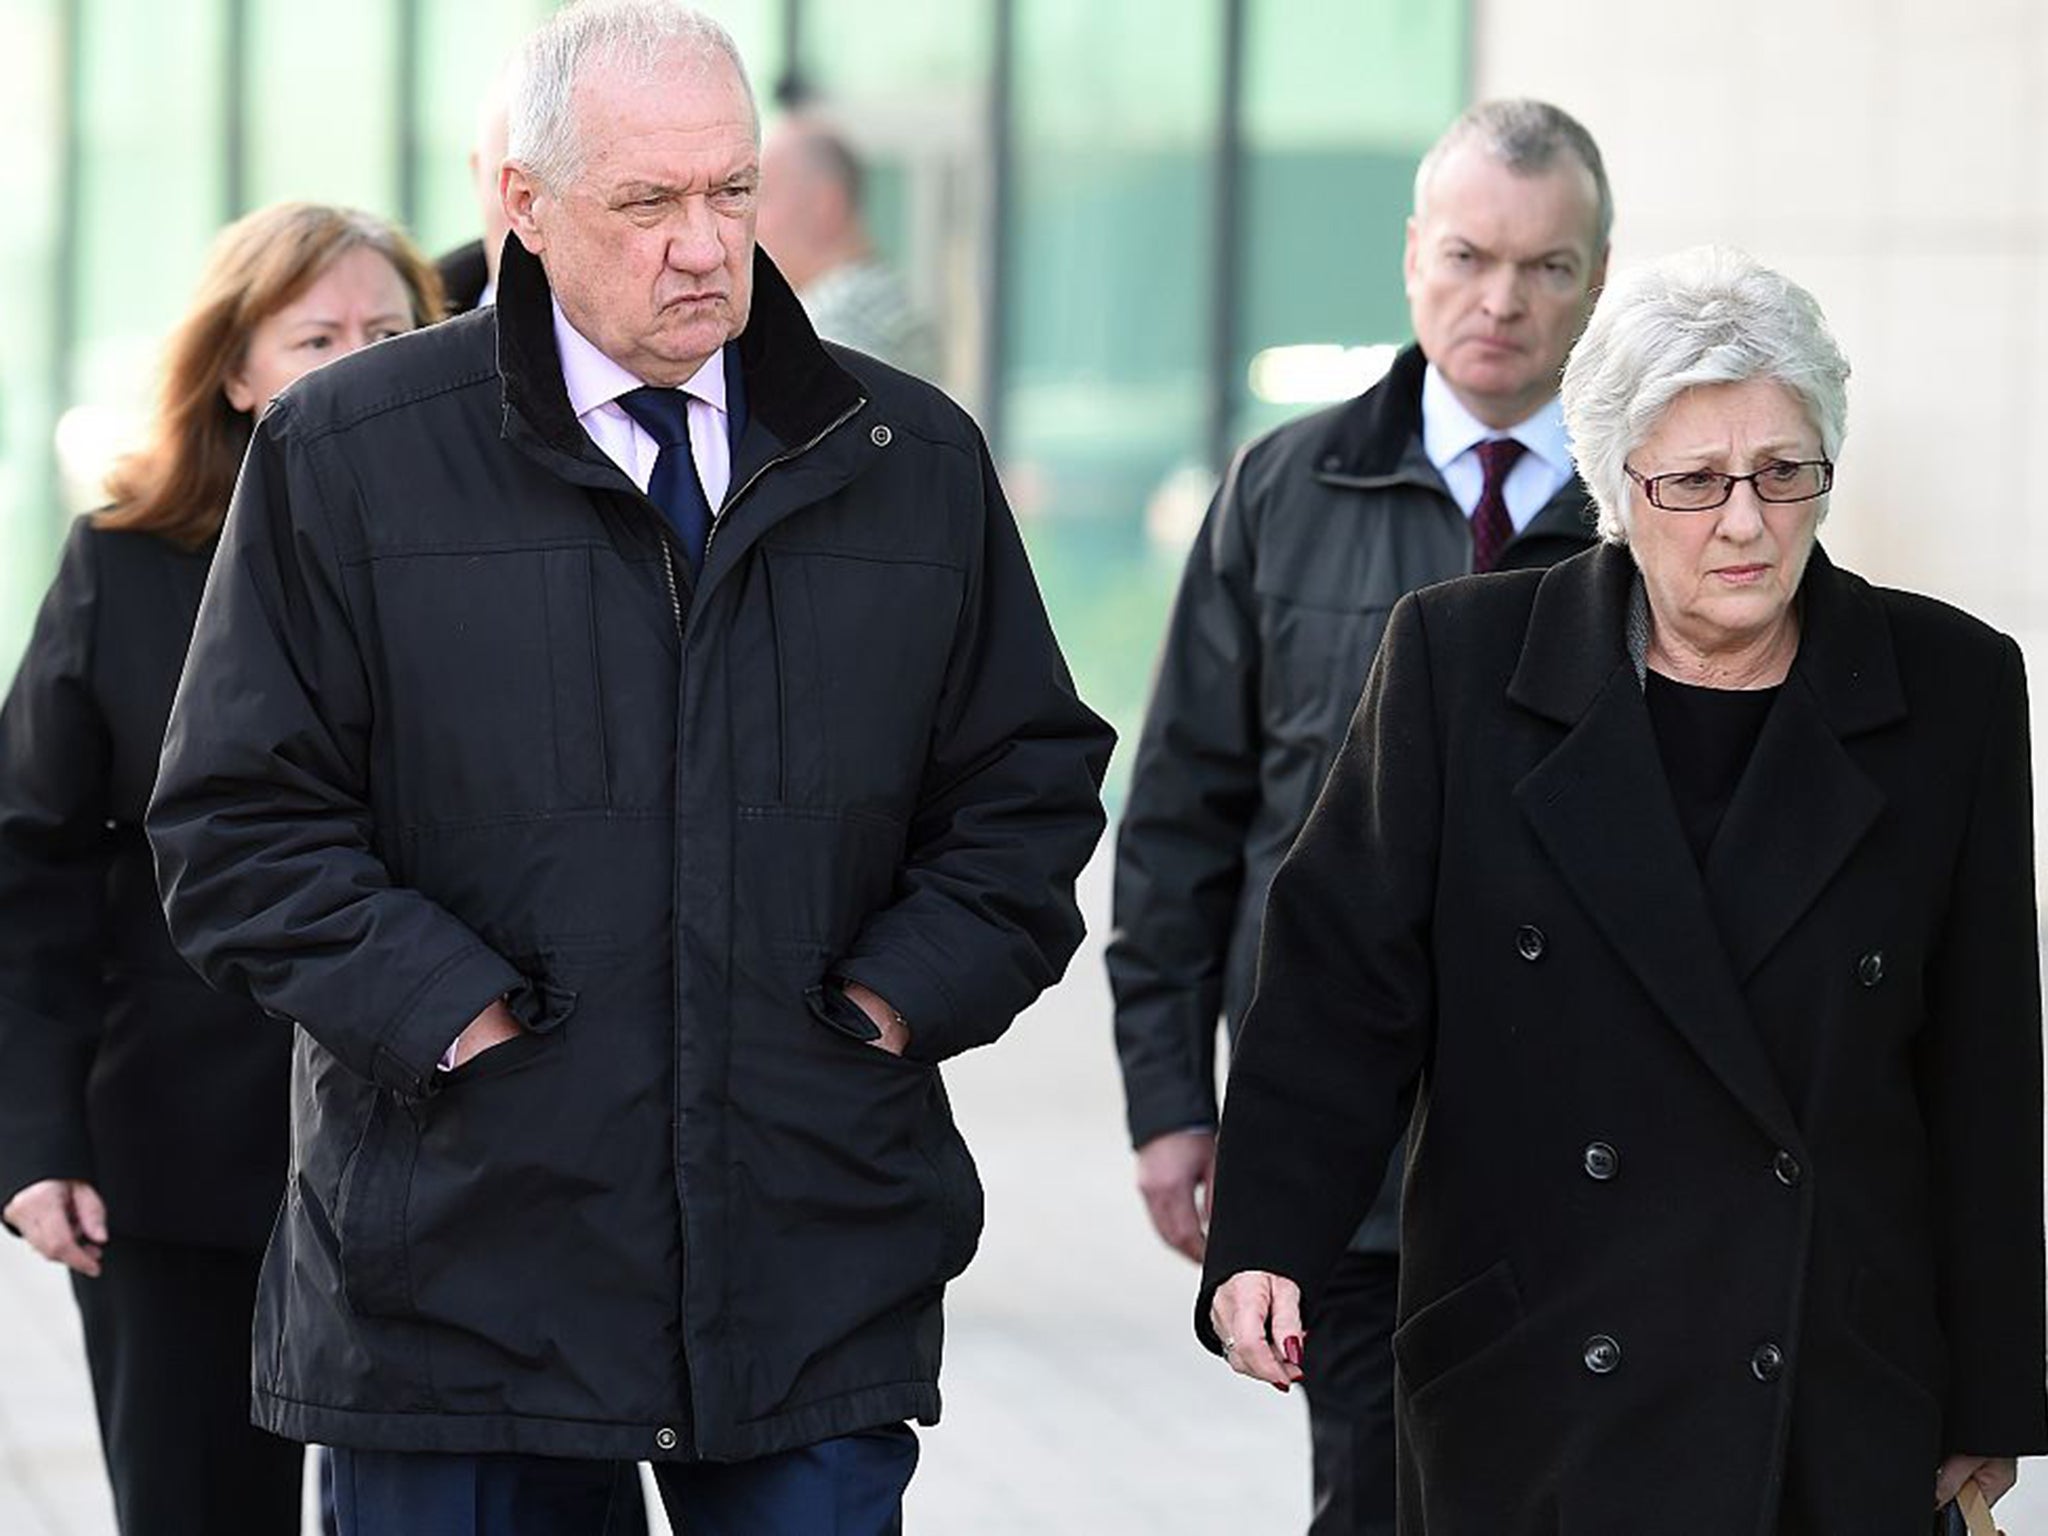 Former South Yorkshire Police chief superintendent David Duckenfield told the Hillsborough inquest his failure to close the tunnel caused the deaths of 96 Liverpool fans AFP/Getty